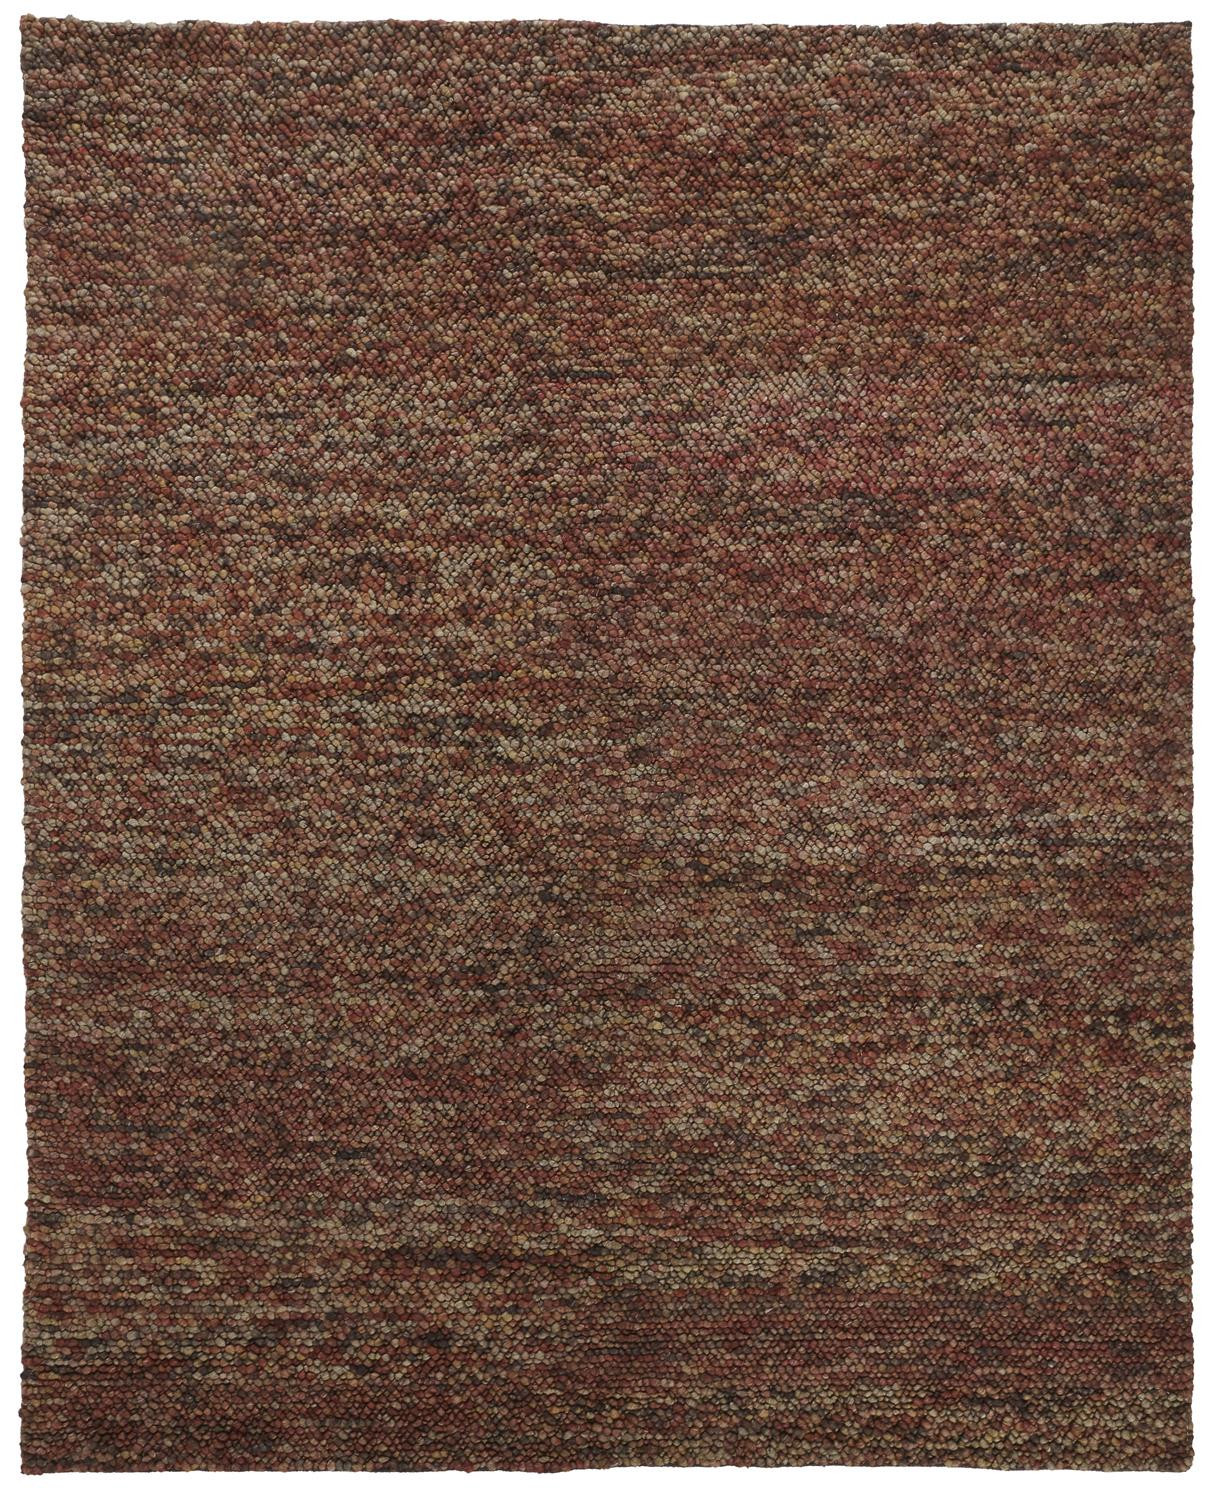 10' X 13' Brown Orange And Red Wool Hand Woven Distressed Stain Resistant Area Rug-515022-1